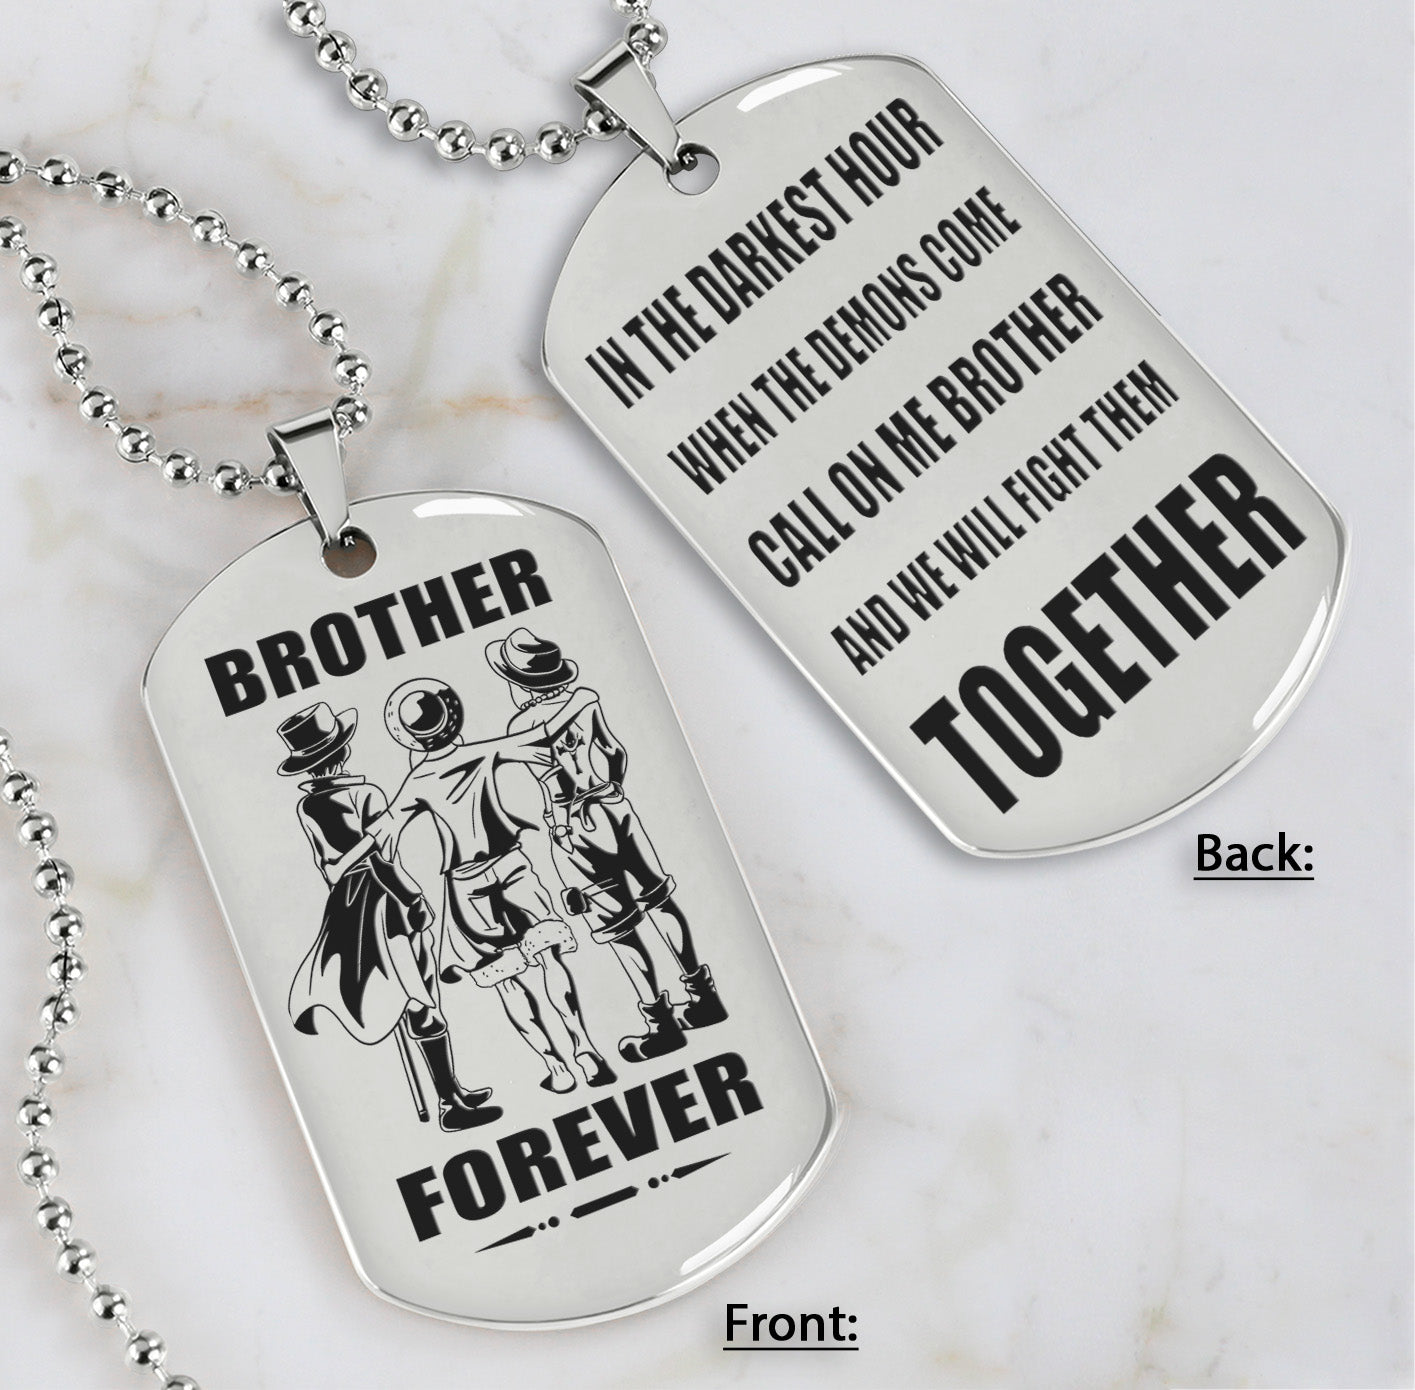 OP engraved double sided dog tag gift from brother, In the darkest hour, When the demons come call on me brother and we will fight them together, brother forever